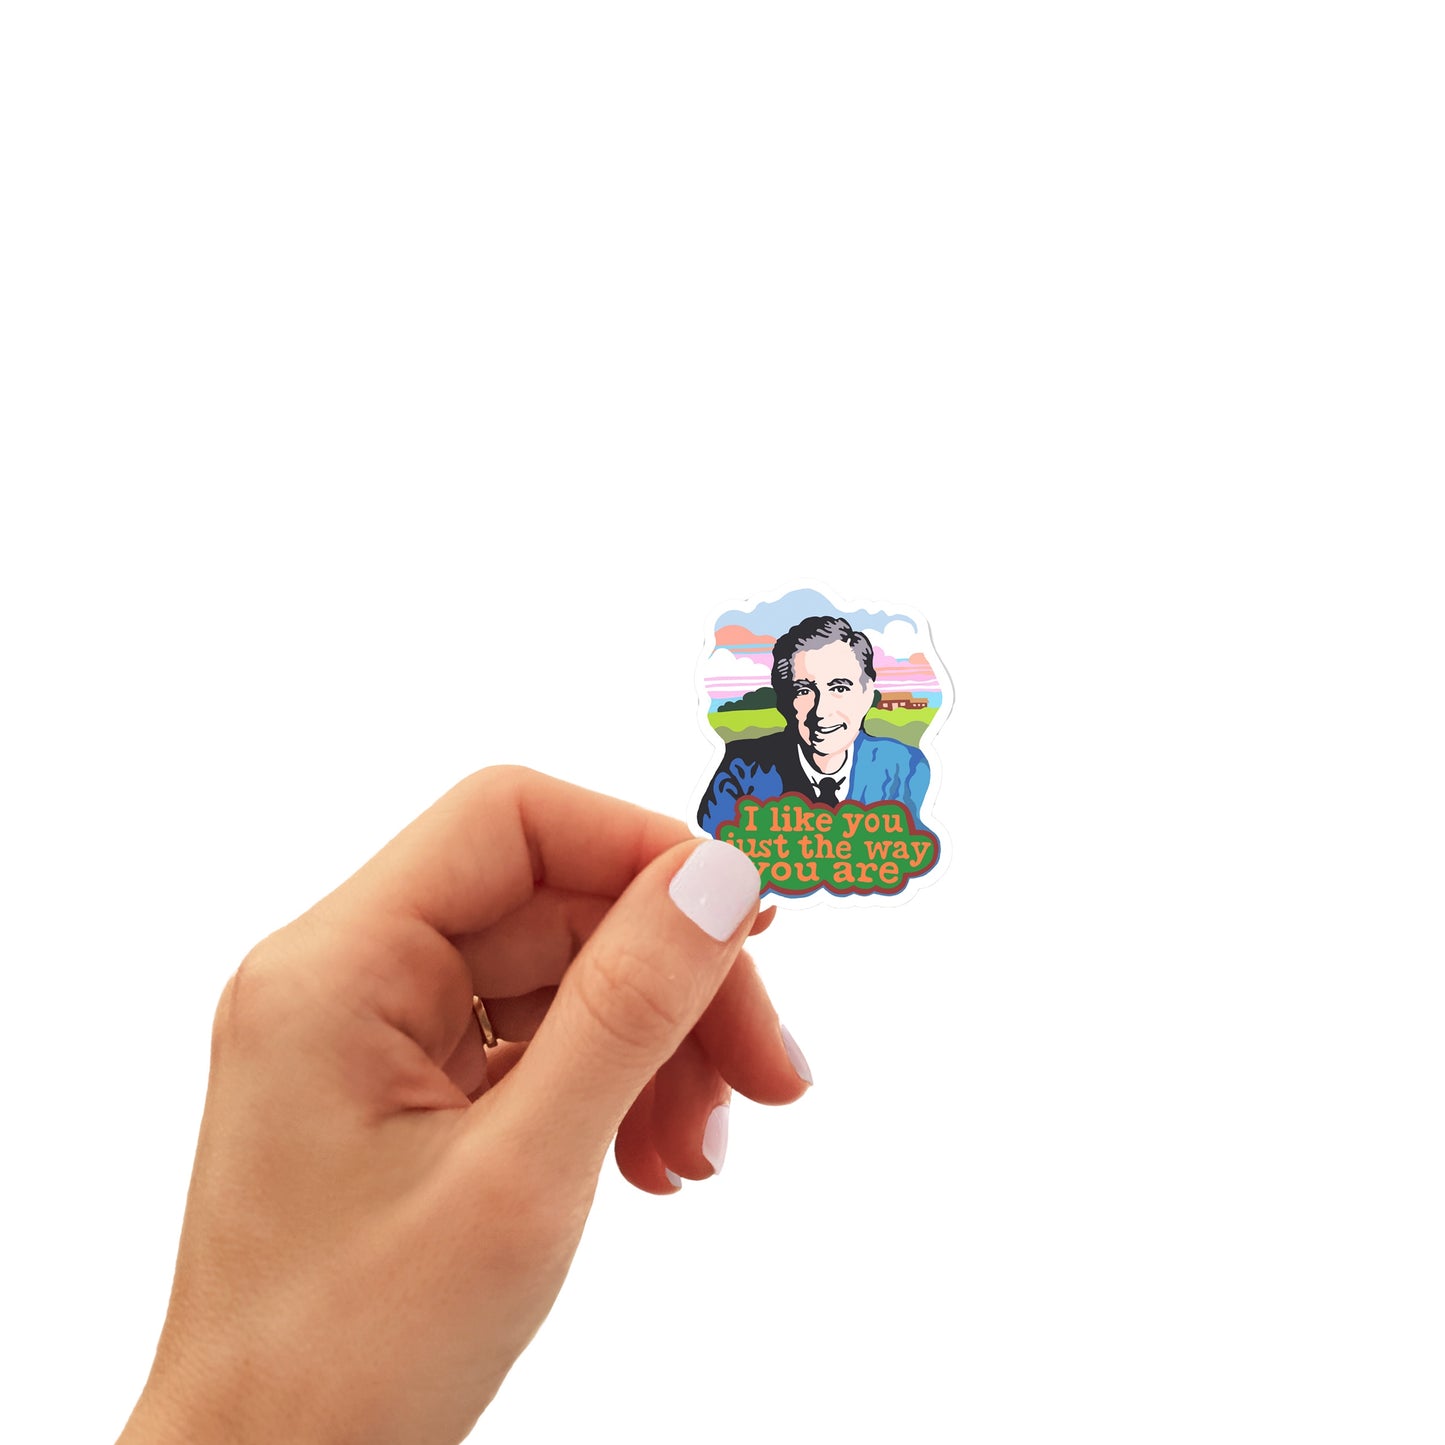 Mr. Rogers ‘I Like You’ Sticker; 1.5”x1” Small Vinyl Decal; Free Shipping